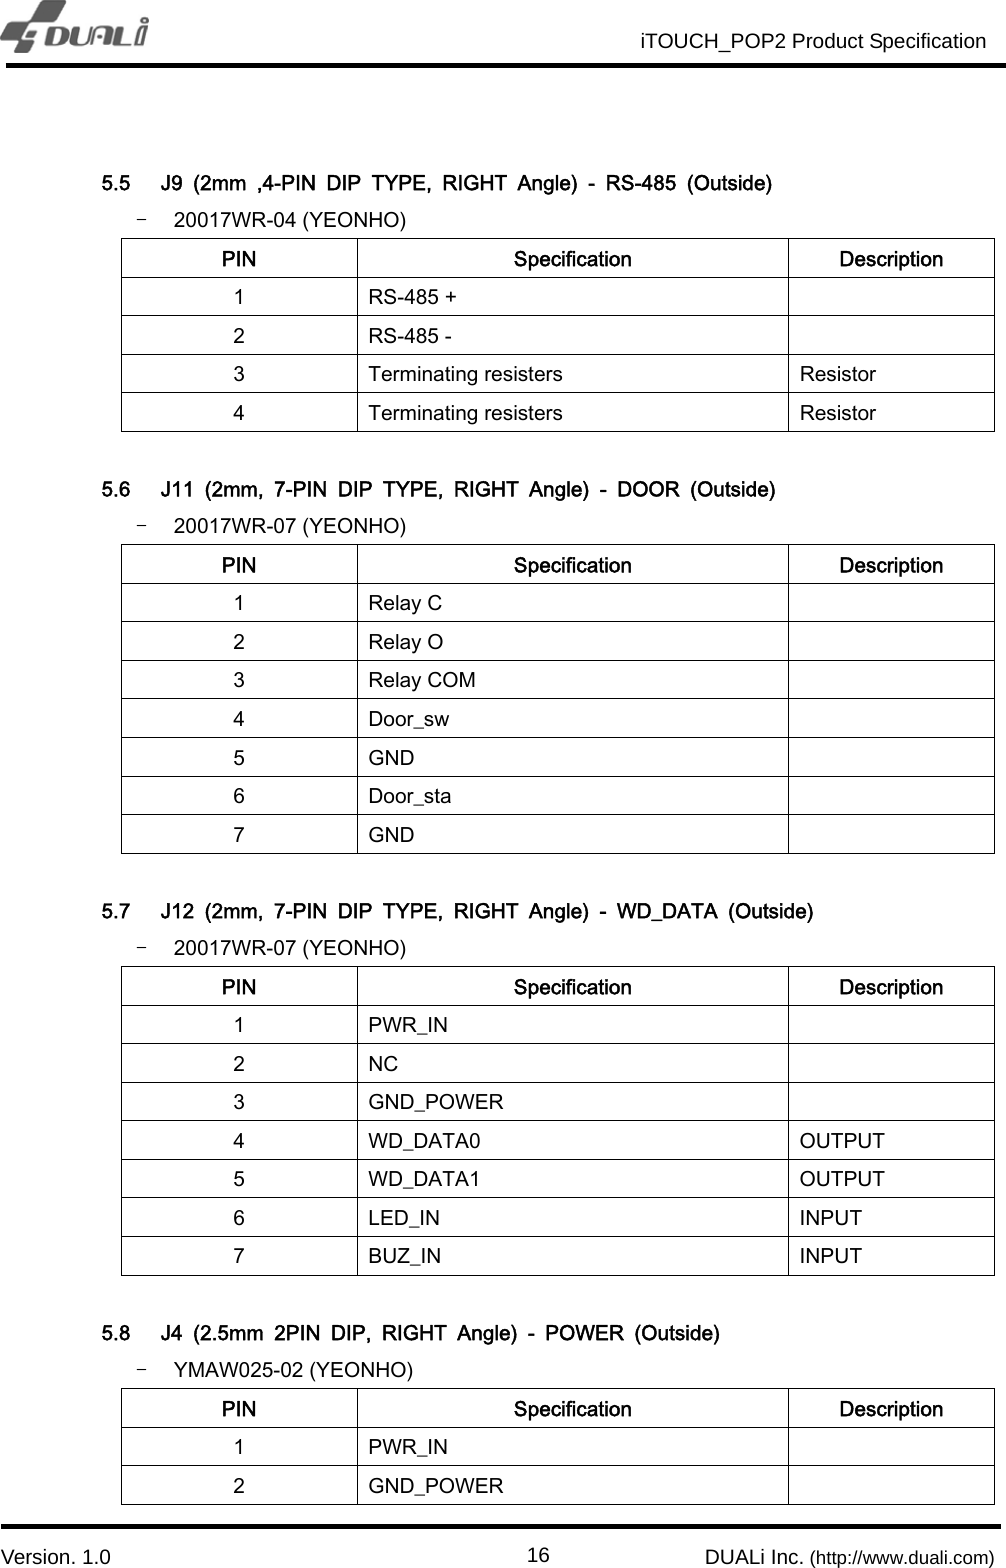                                                          iTOUCH_POP2 Product Specification                          `  Version. 1.0                                                         DUALi Inc. (http://www.duali.com)  16 5.5 J9  (2mm  ,4-PIN  DIP  TYPE,  RIGHT  Angle)  -  RS-485  (Outside) - 20017WR-04 (YEONHO) PIN  Specification  Description 1  RS-485 +   2  RS-485 -   3  Terminating resisters  Resistor 4  Terminating resisters  Resistor  5.6 J11  (2mm,  7-PIN  DIP  TYPE,  RIGHT  Angle)  -  DOOR  (Outside) - 20017WR-07 (YEONHO) PIN  Specification  Description 1  Relay C   2  Relay O   3  Relay COM   4  Door_sw   5  GND   6  Door_sta   7  GND    5.7 J12  (2mm,  7-PIN  DIP  TYPE,  RIGHT  Angle)  -  WD_DATA  (Outside) - 20017WR-07 (YEONHO) PIN  Specification  Description 1  PWR_IN   2  NC   3  GND_POWER   4  WD_DATA0  OUTPUT 5  WD_DATA1  OUTPUT 6  LED_IN  INPUT 7  BUZ_IN  INPUT  5.8 J4  (2.5mm  2PIN  DIP,  RIGHT  Angle)  -  POWER  (Outside) - YMAW025-02 (YEONHO) PIN  Specification  Description 1  PWR_IN   2  GND_POWER   